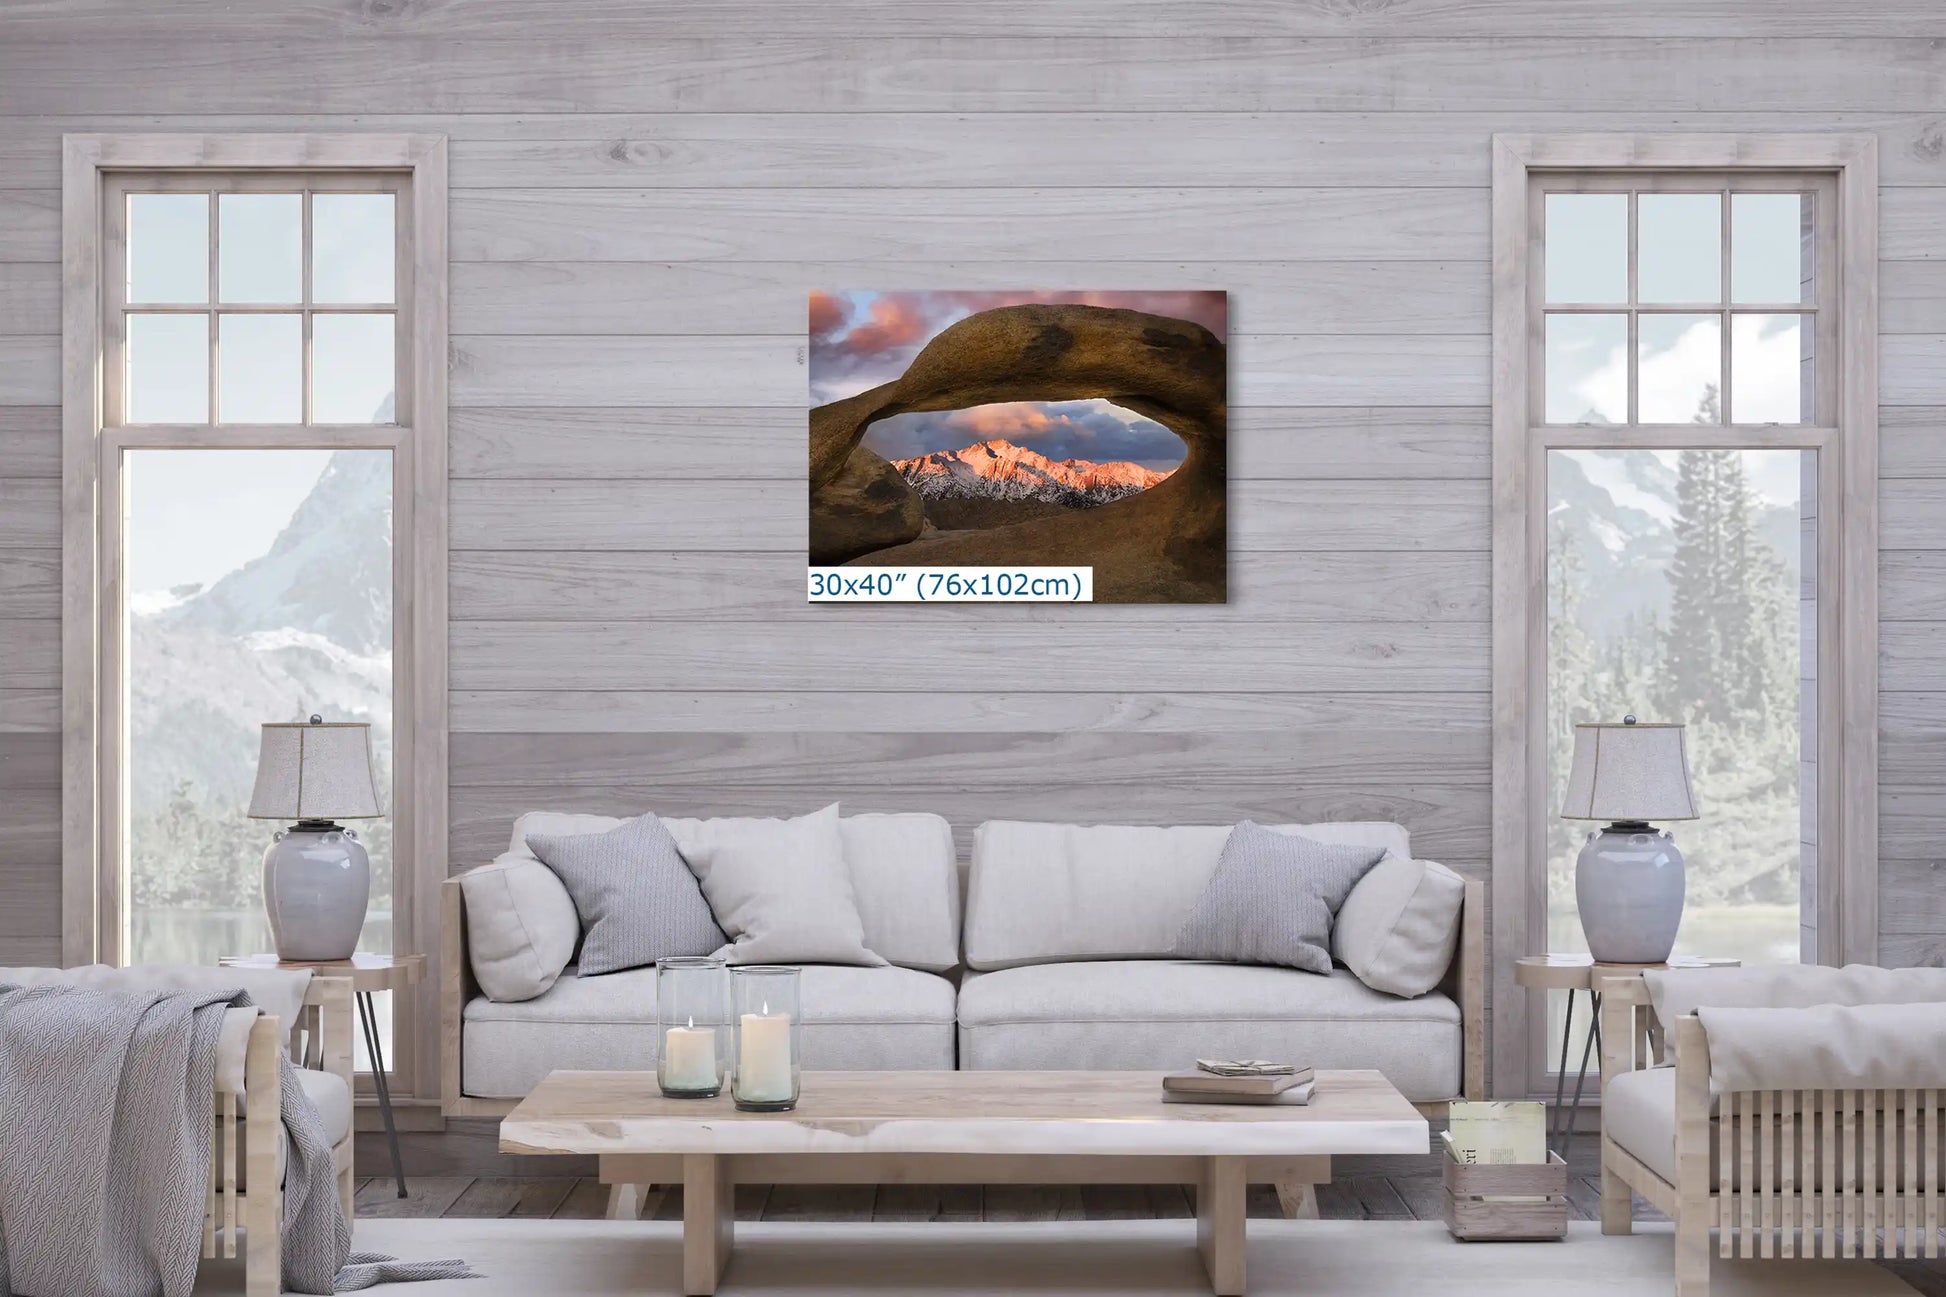 Spacious living room featuring a 30x40 canvas of Lone Pine Peak through Mobius Arch, complementing a comfortable seating area.